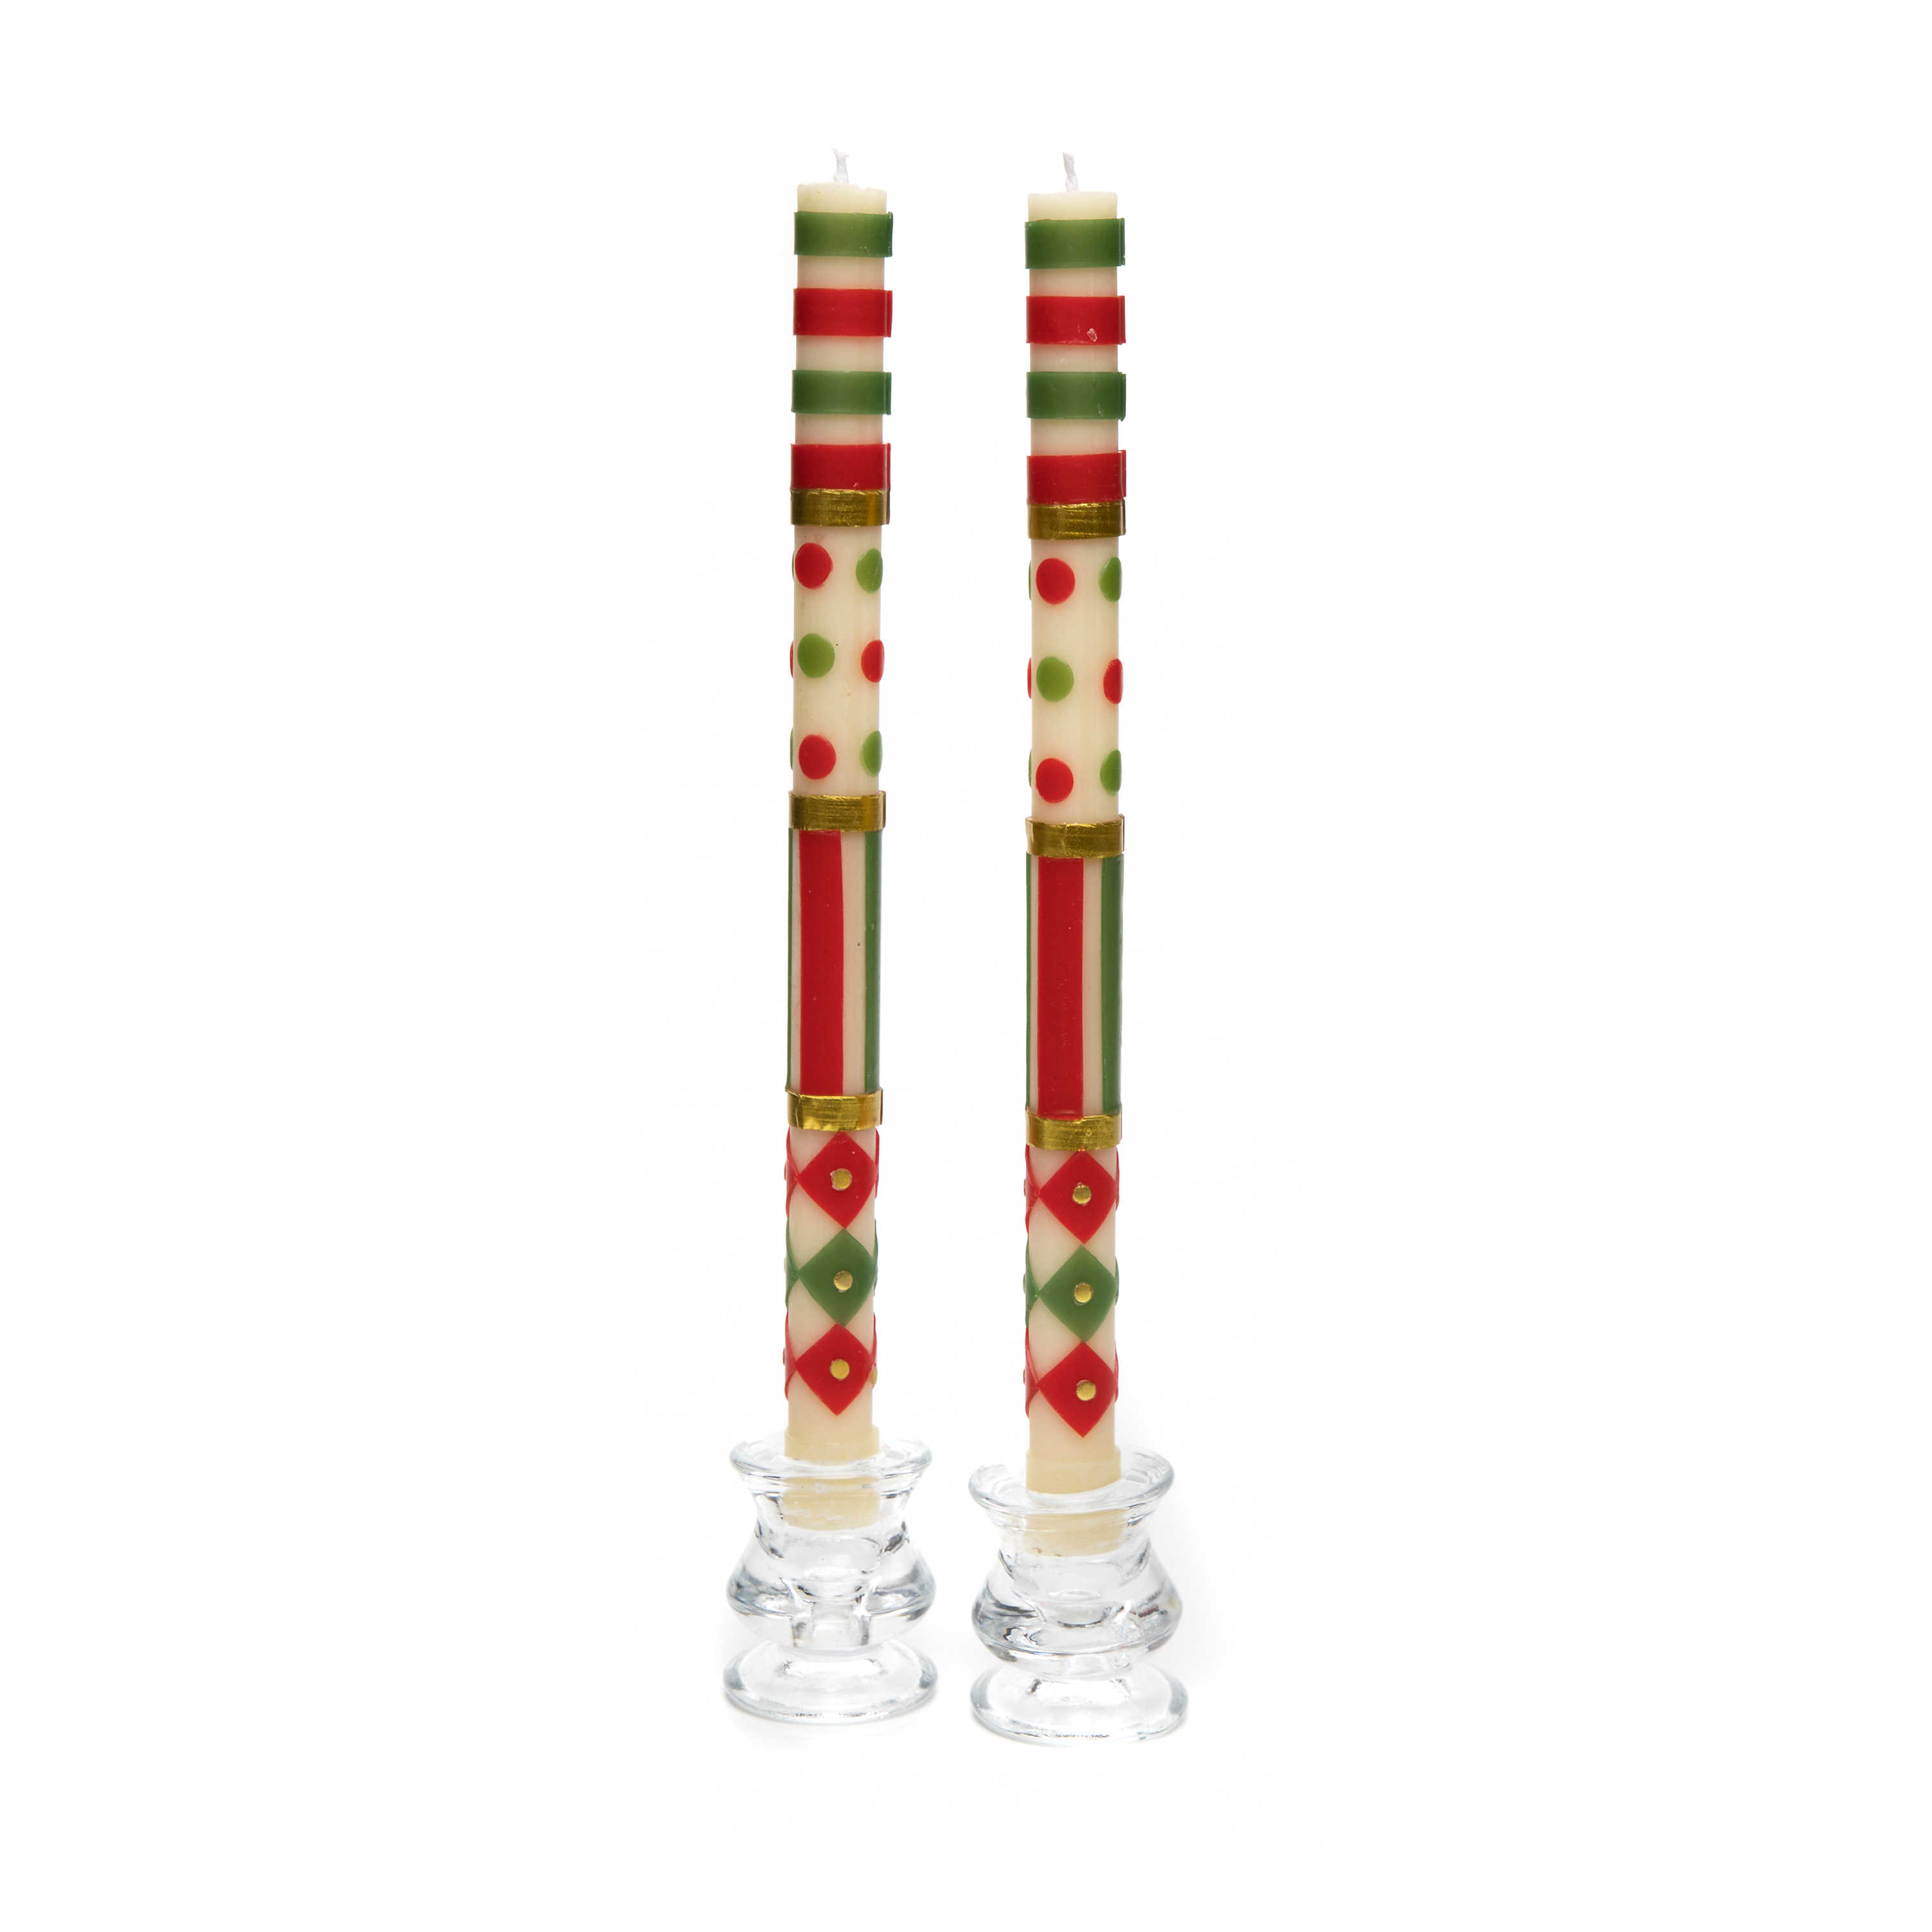 Jester Dinner Candles - Red, Green, & Gold - Set of 2 mackenzie-childs Panama 0